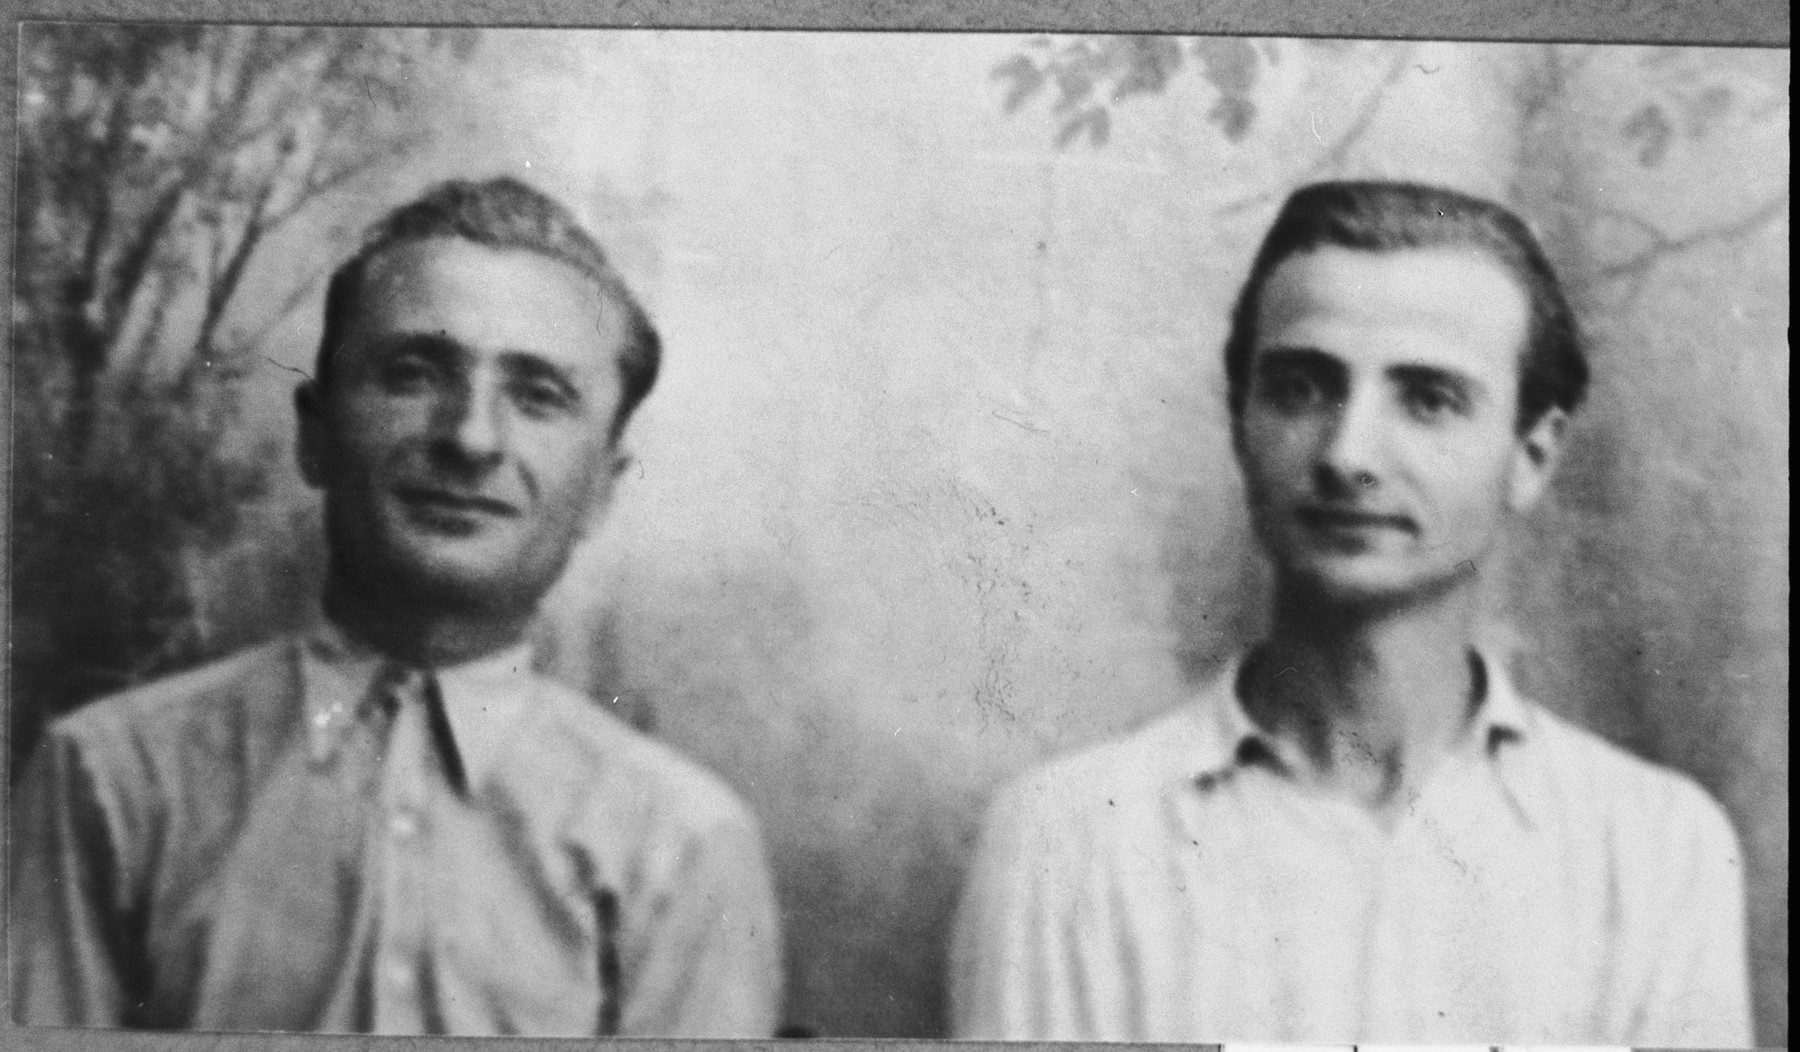 Portrait of Pepo and Isak Aroesti, sons of Samuel Aroesti.  Pepo was a second-hand dealer and Isak, a student.  They lived at Ferizovatska 13 in Bitola.